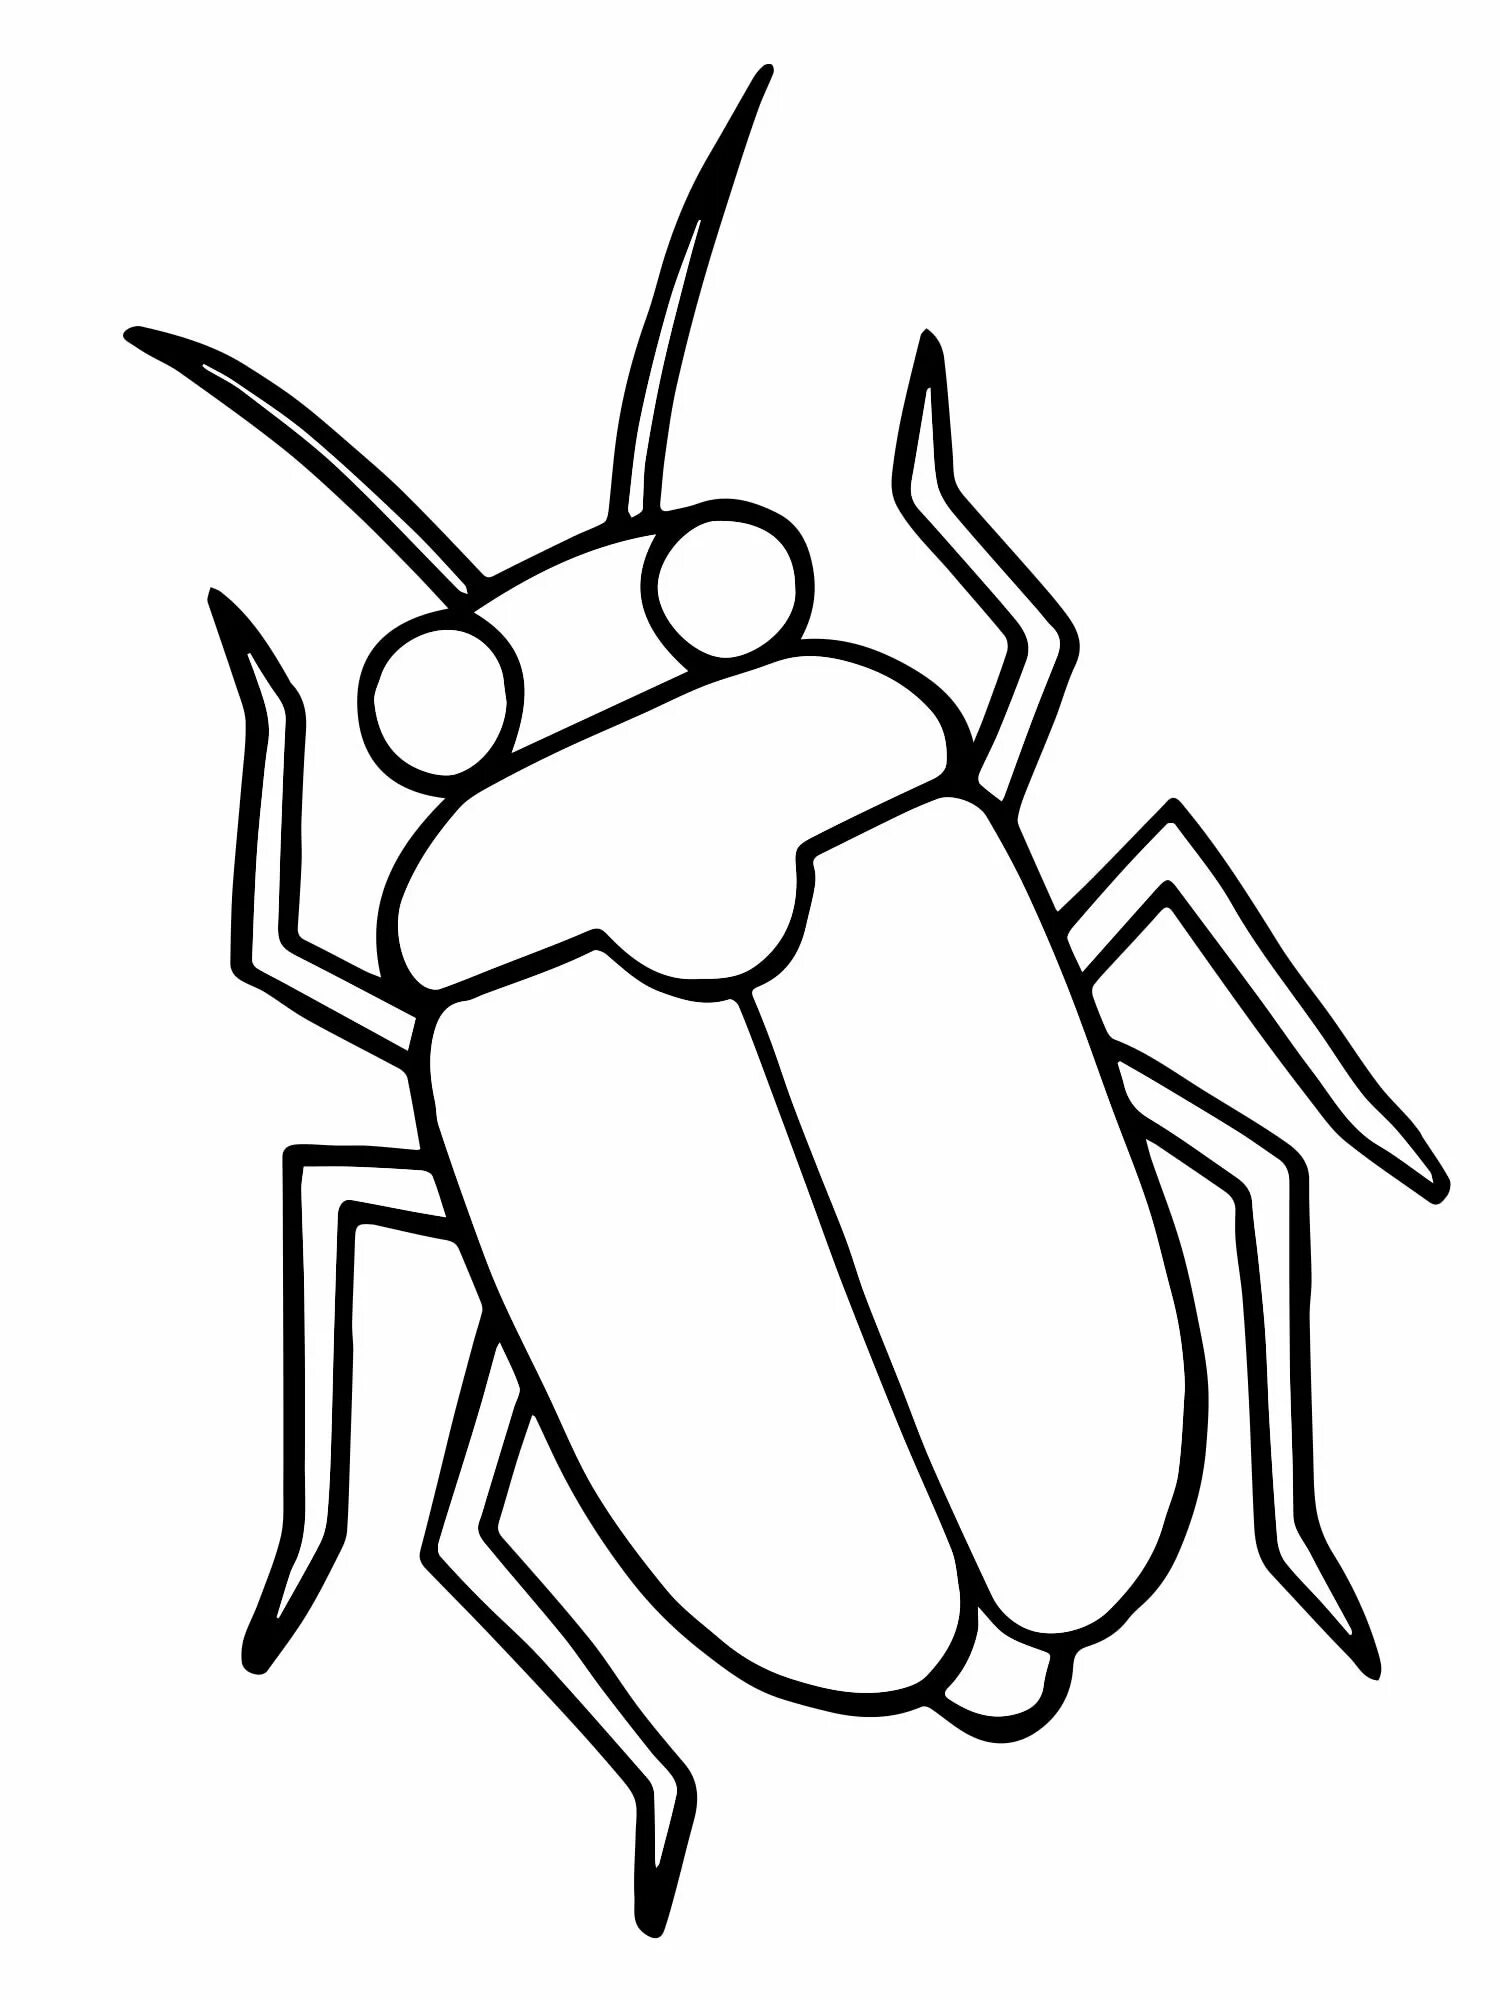 Coloring beetles for children 3-4 years old